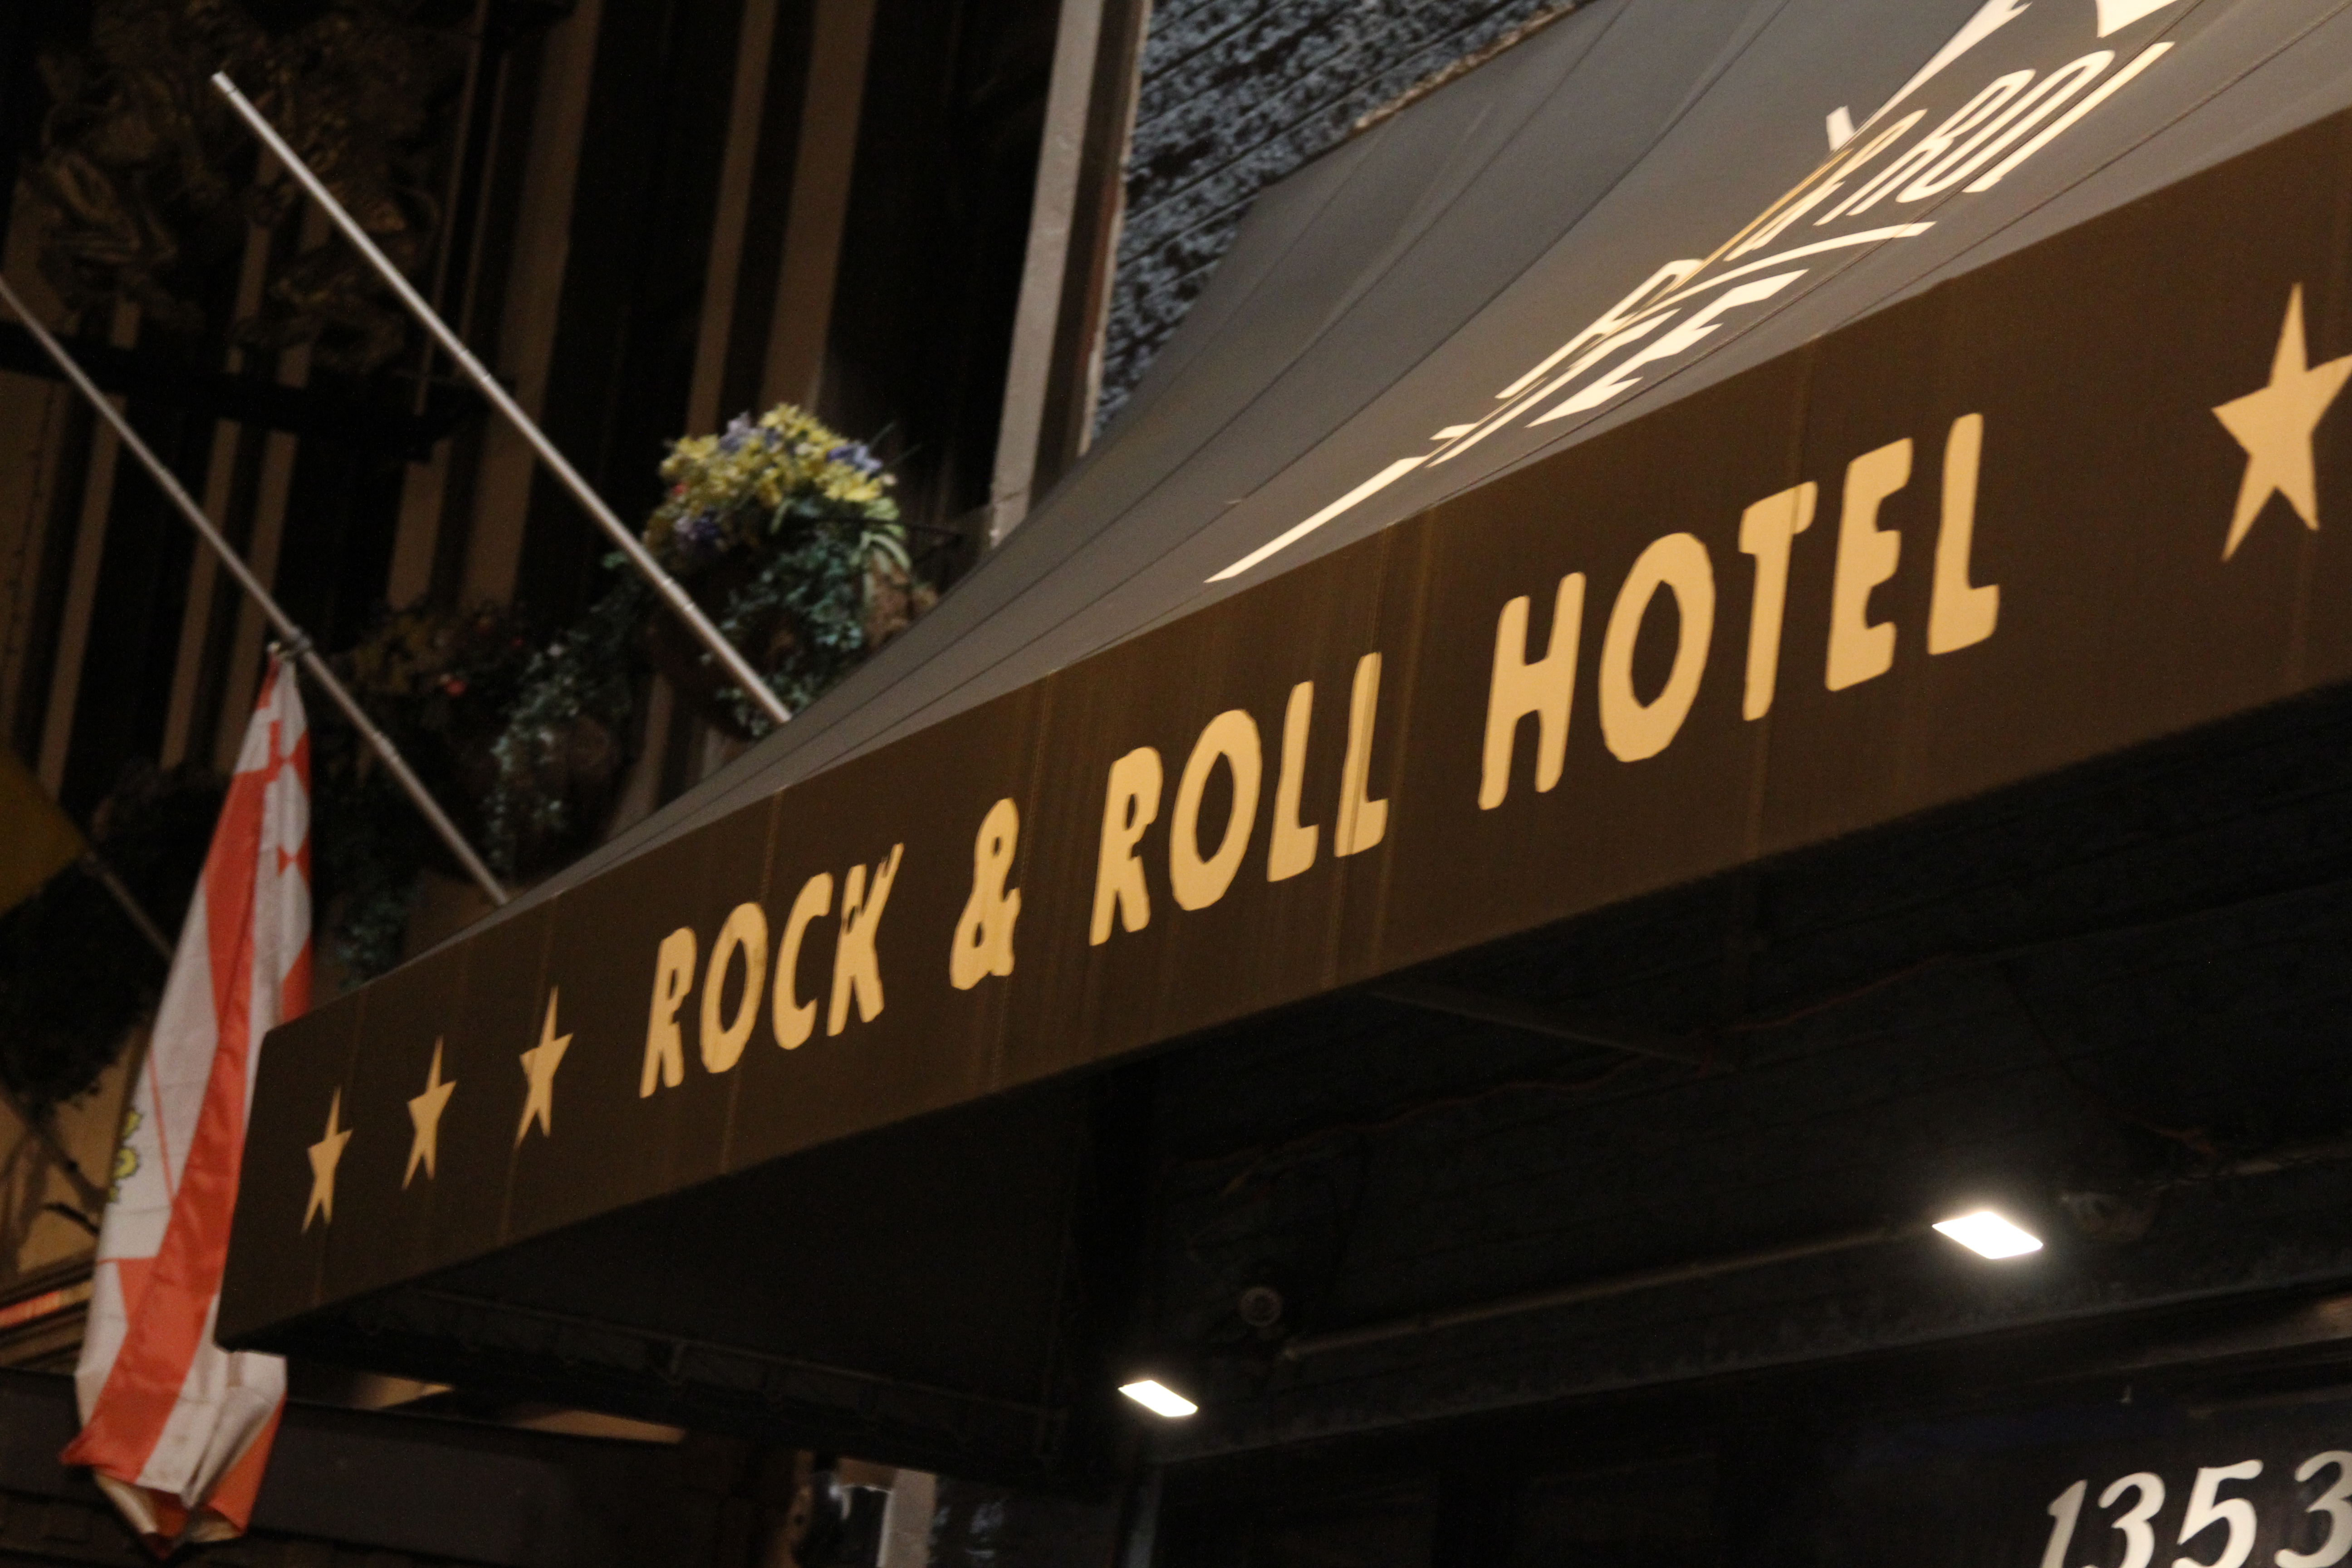 Rock And Roll Hotel